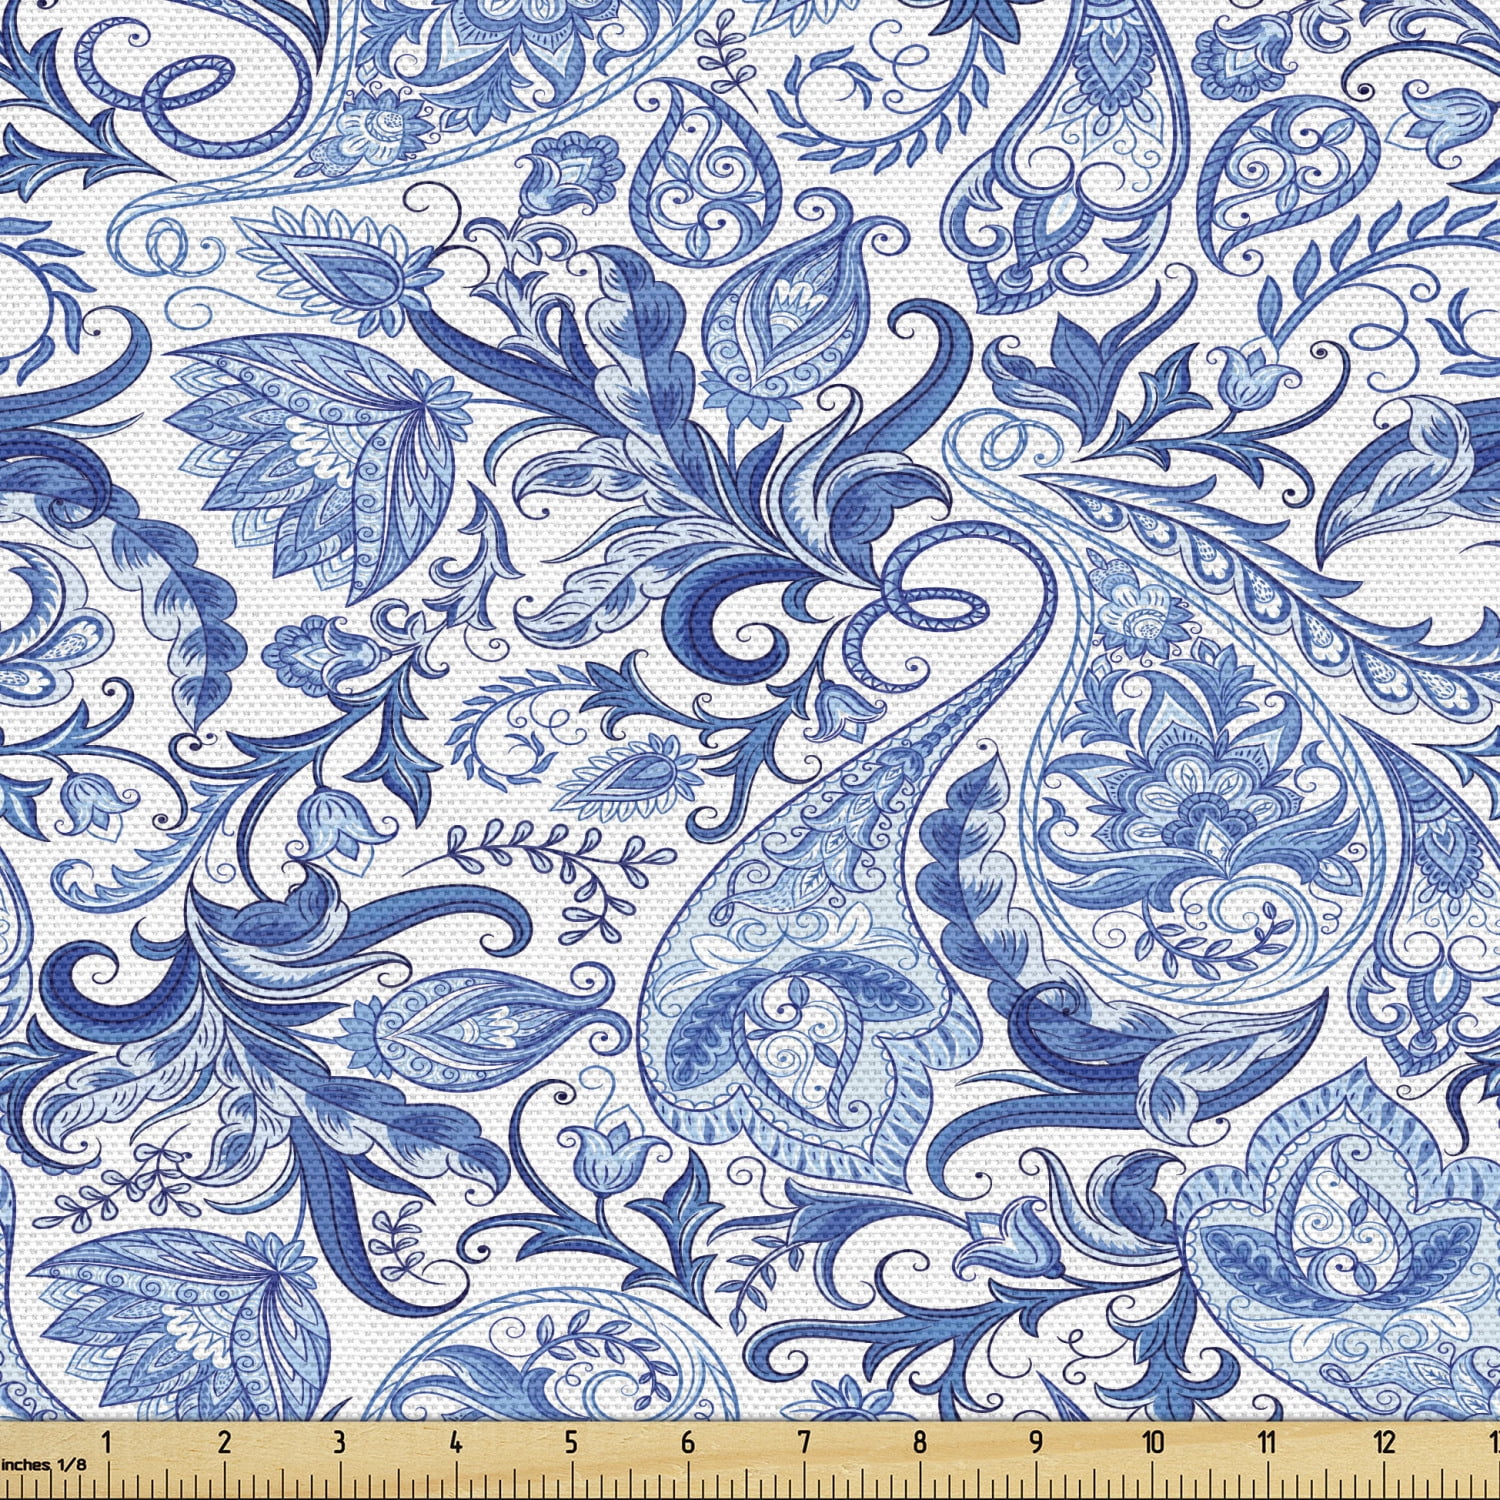 Paisley Fabric By The Yard Native Pattern In Blue Tones Nature Themed Print Upholstery Fabric